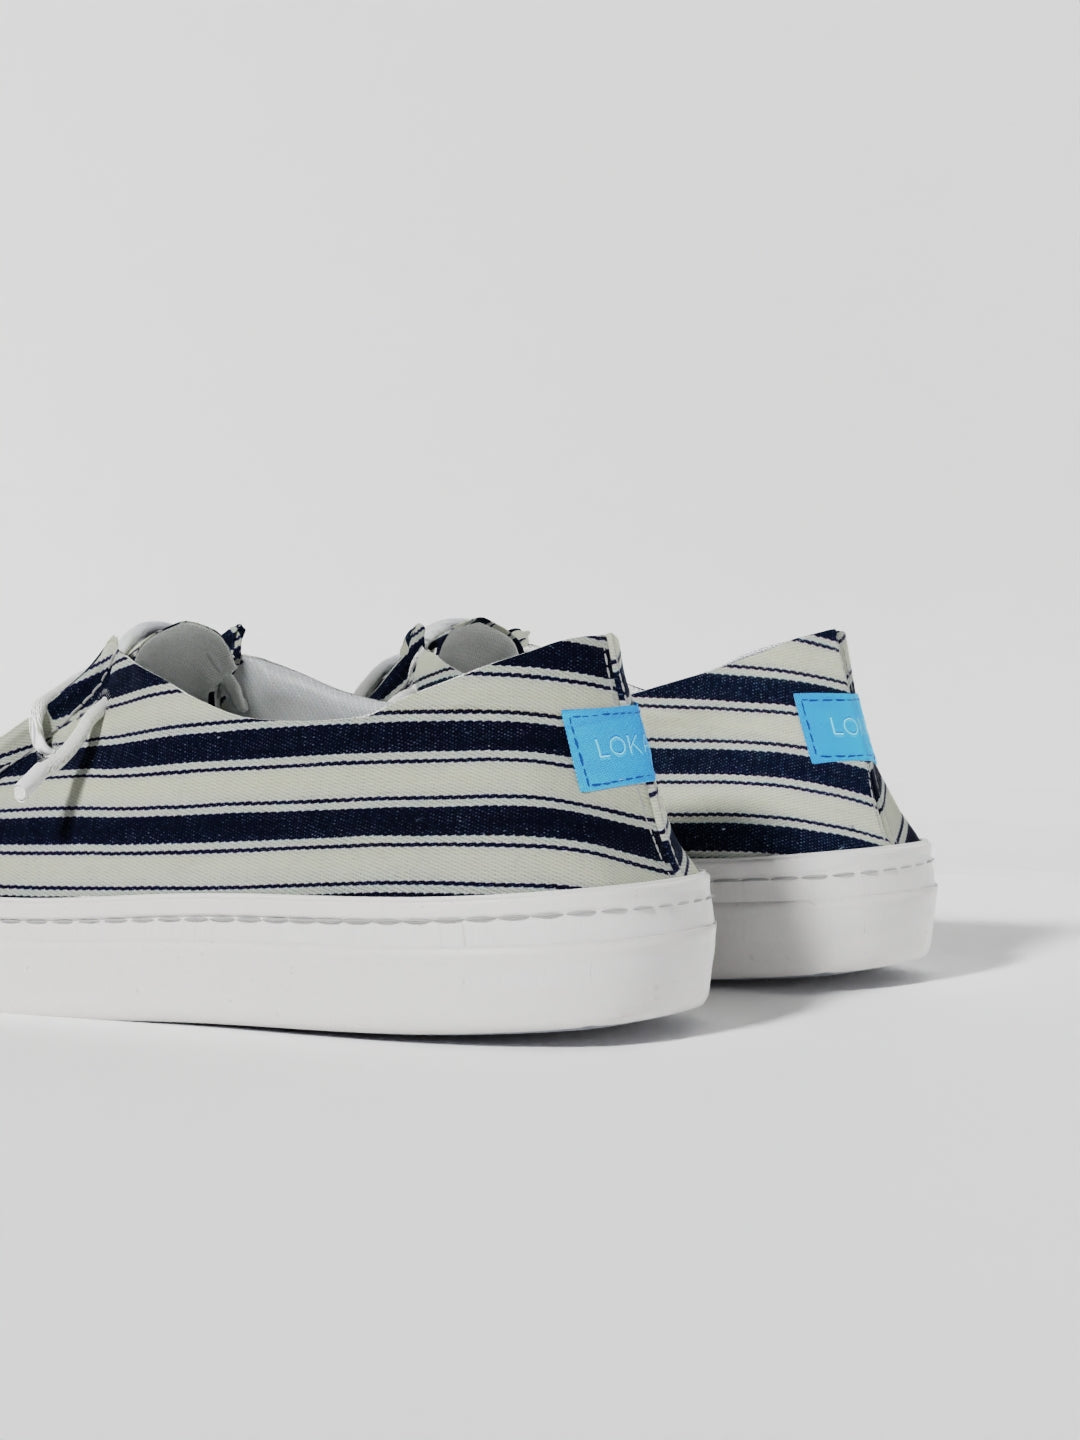 The Luna Navy and White Stripes 1